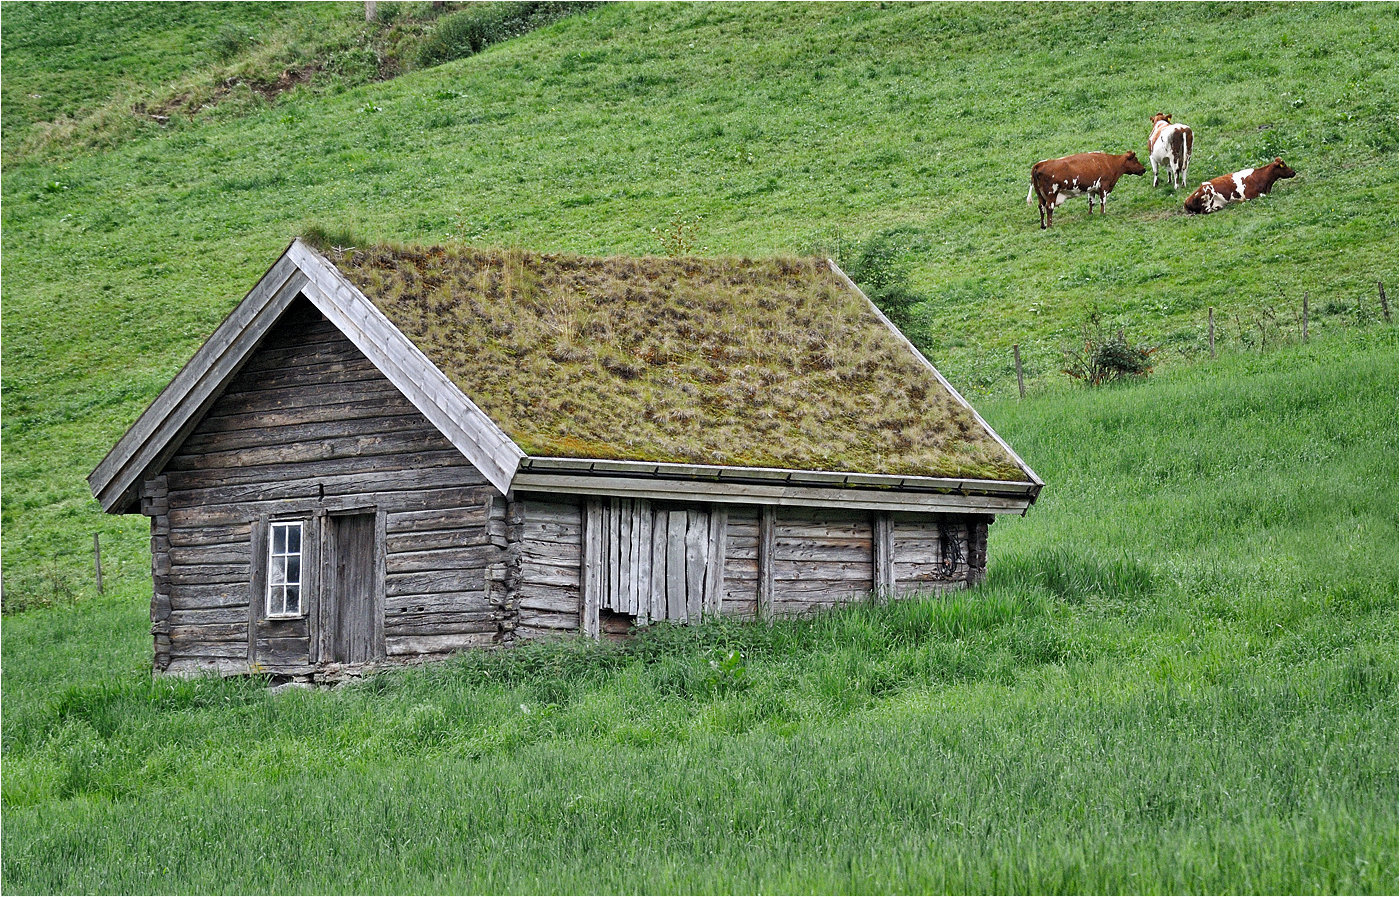 Traditional hut. Olden, Norway.